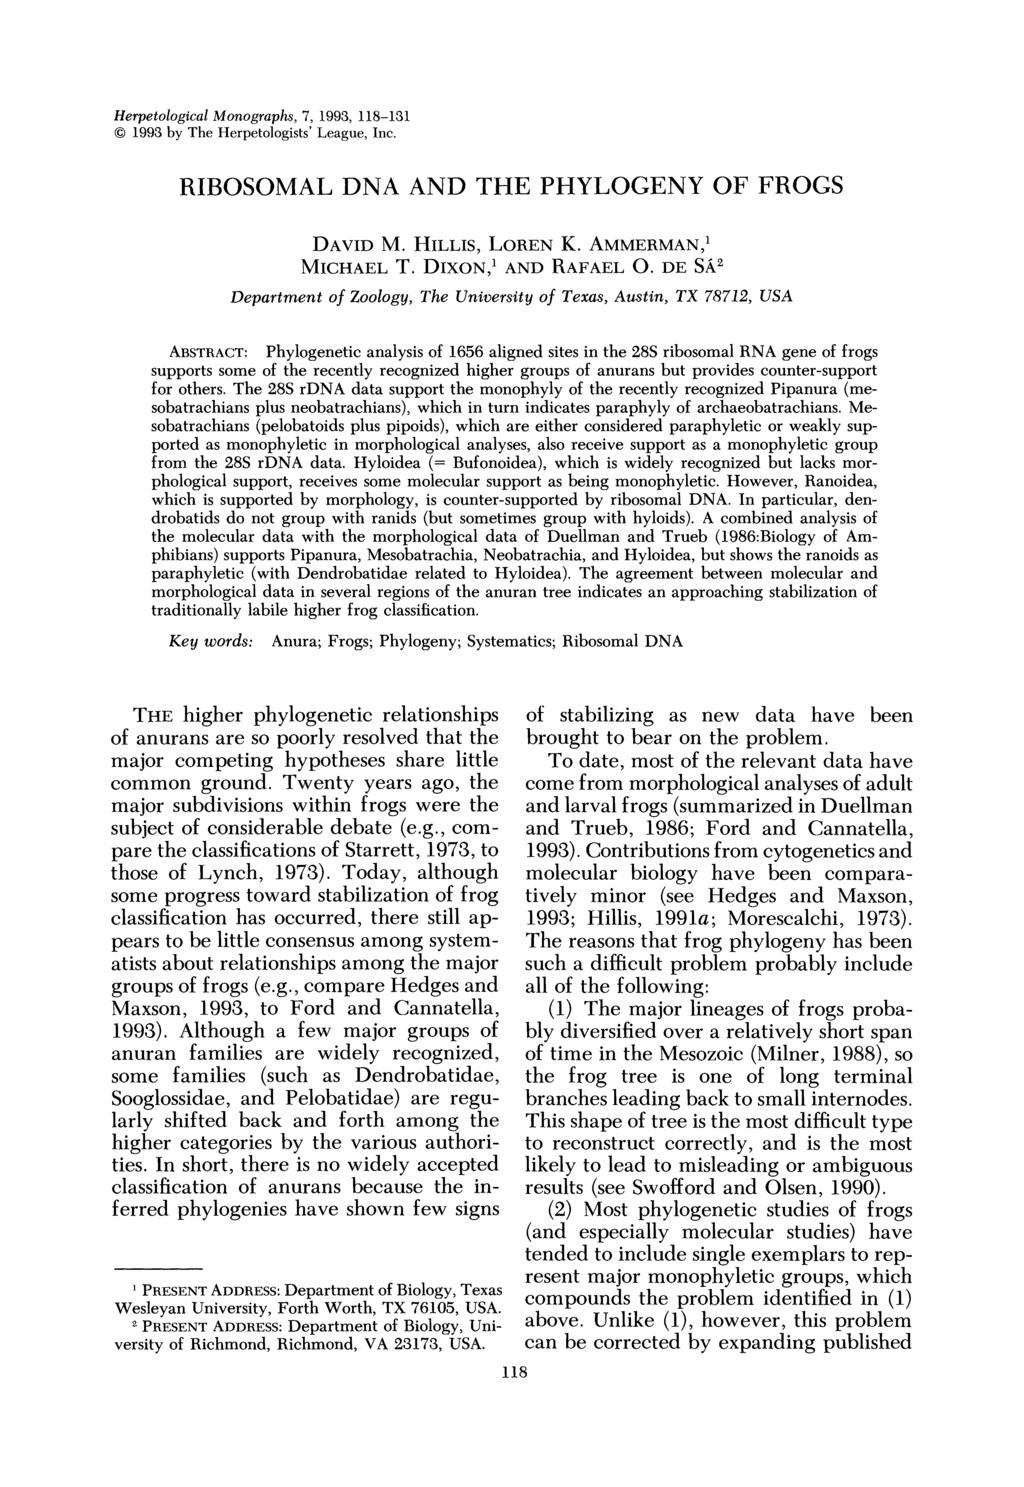 Herpetological Monographs, 7, 1993, 118-131? 1993 by The Herpetologists' League, Inc. RIBOSOMAL DNA AND THE PHYLOGENY OF FROGS DAVID M. HILLIS, LOREN K. AMMERMAN,1 MICHAEL T. DIXON,' AND RAFAEL 0.